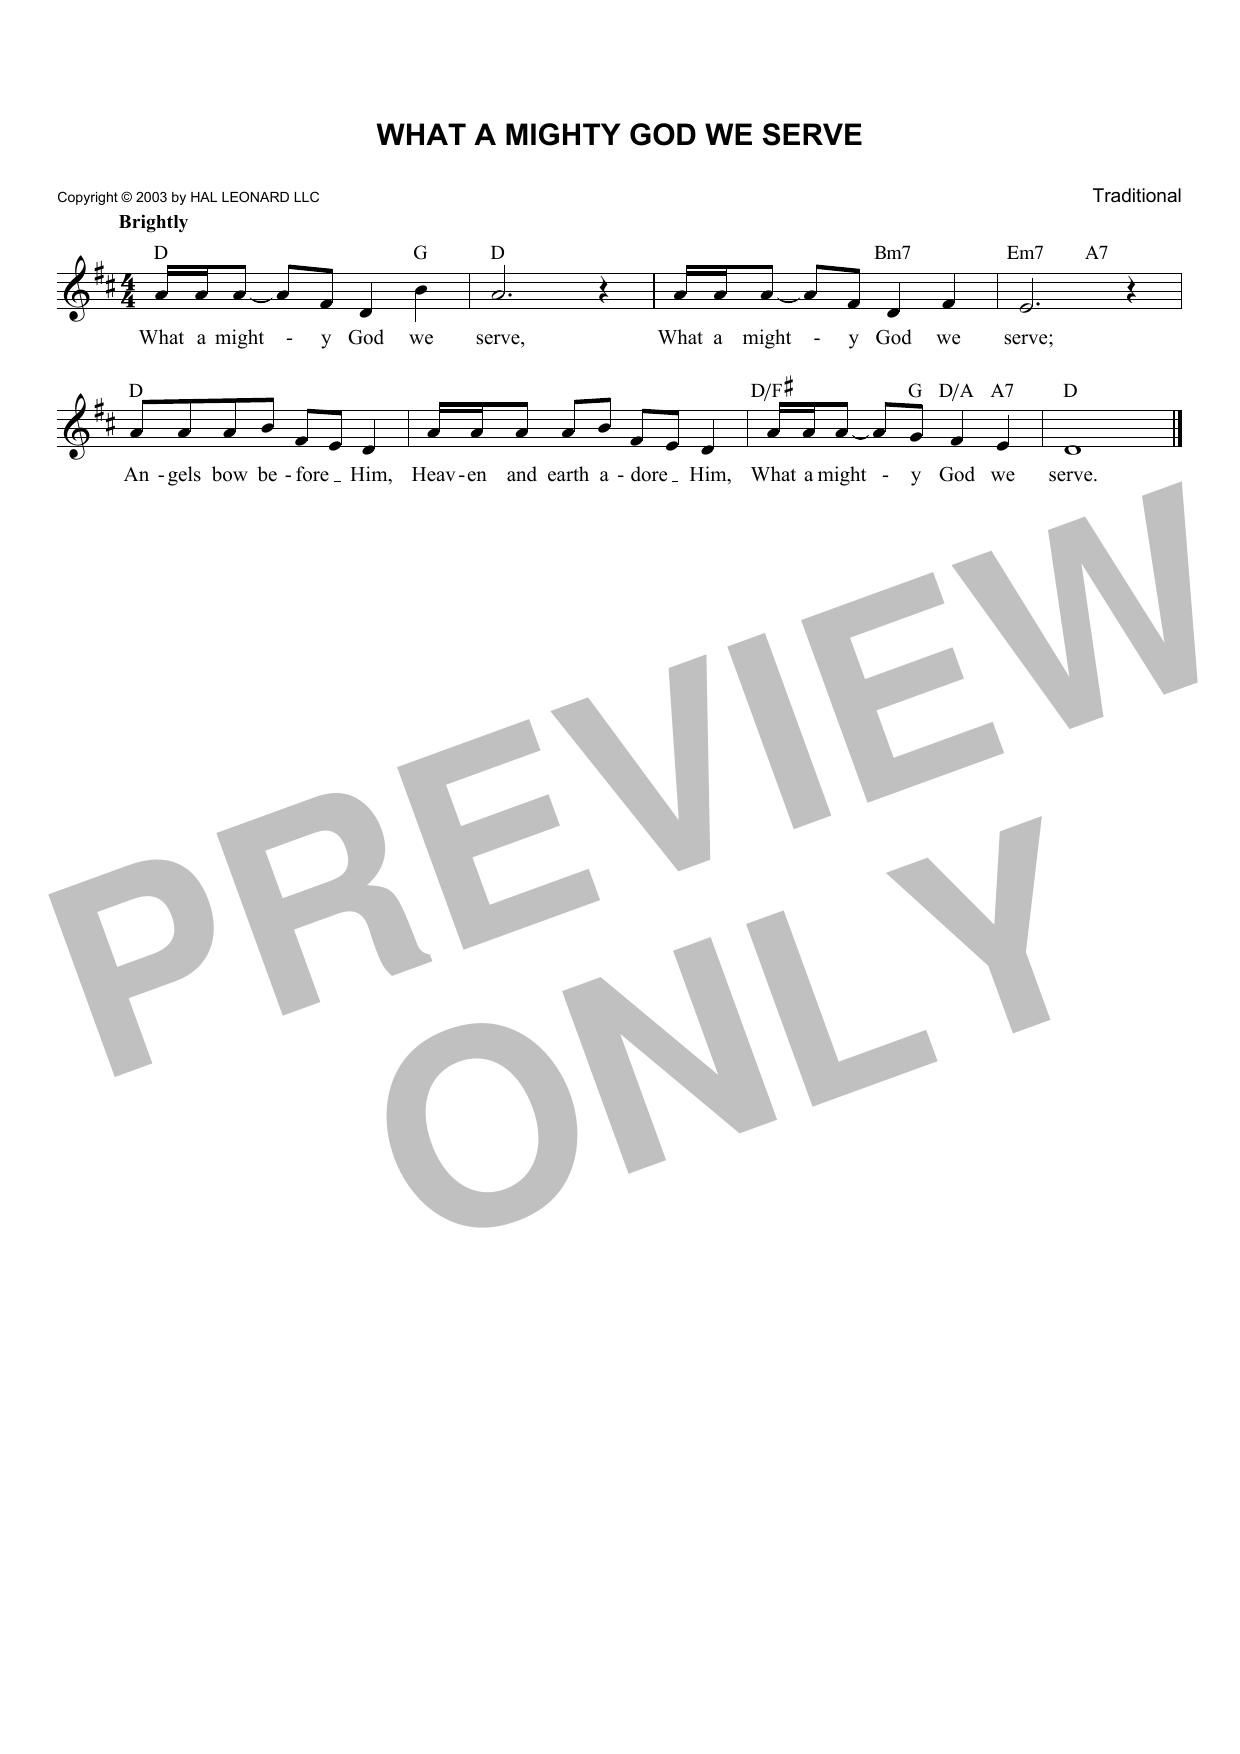 Download Traditional What A Mighty God We Serve Sheet Music